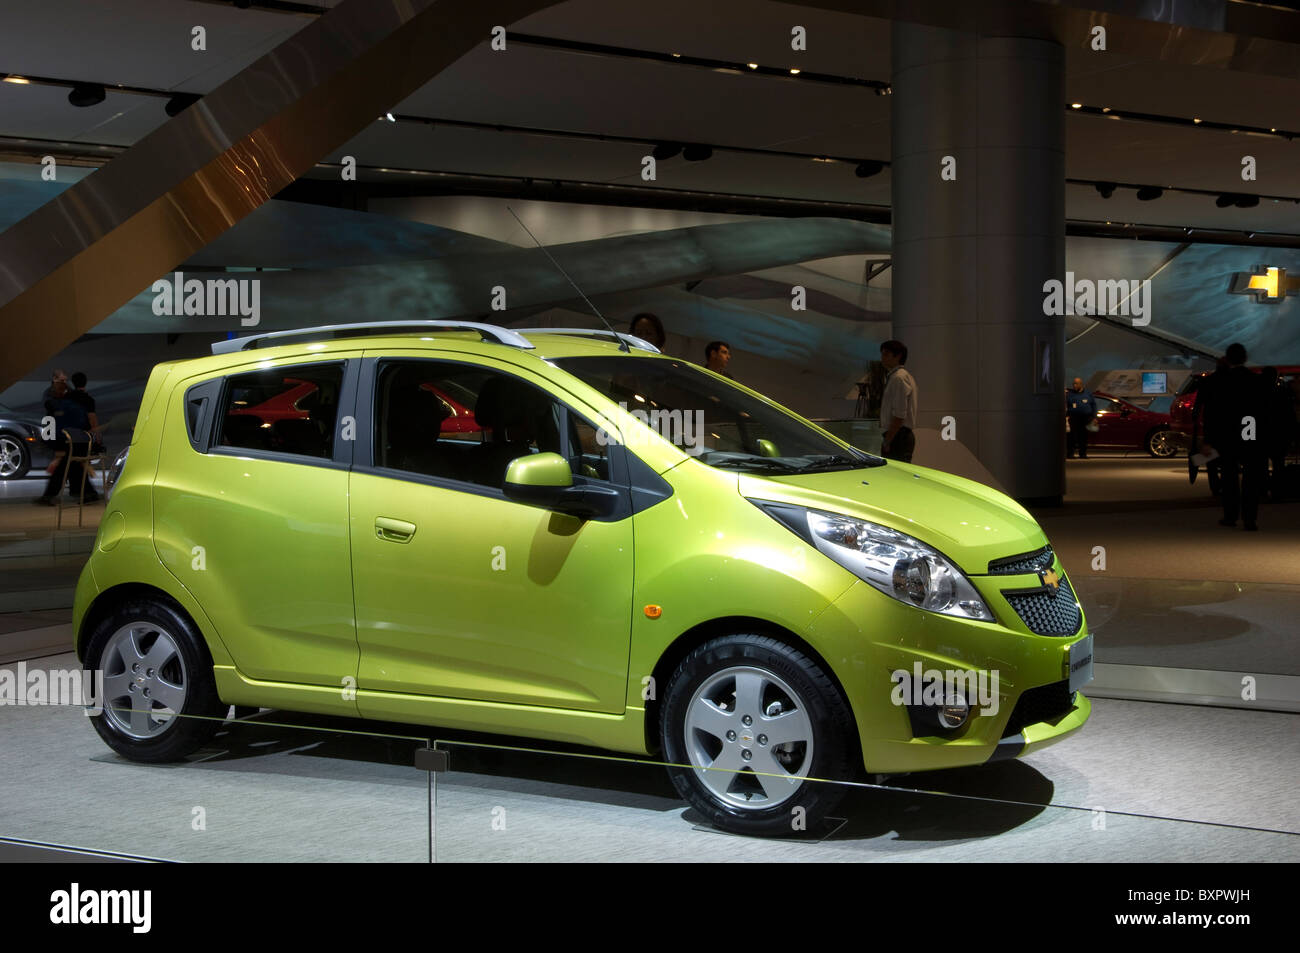 Chevrolet Spark at the 2010 North American International Auto Show in Detroit Stock Photo